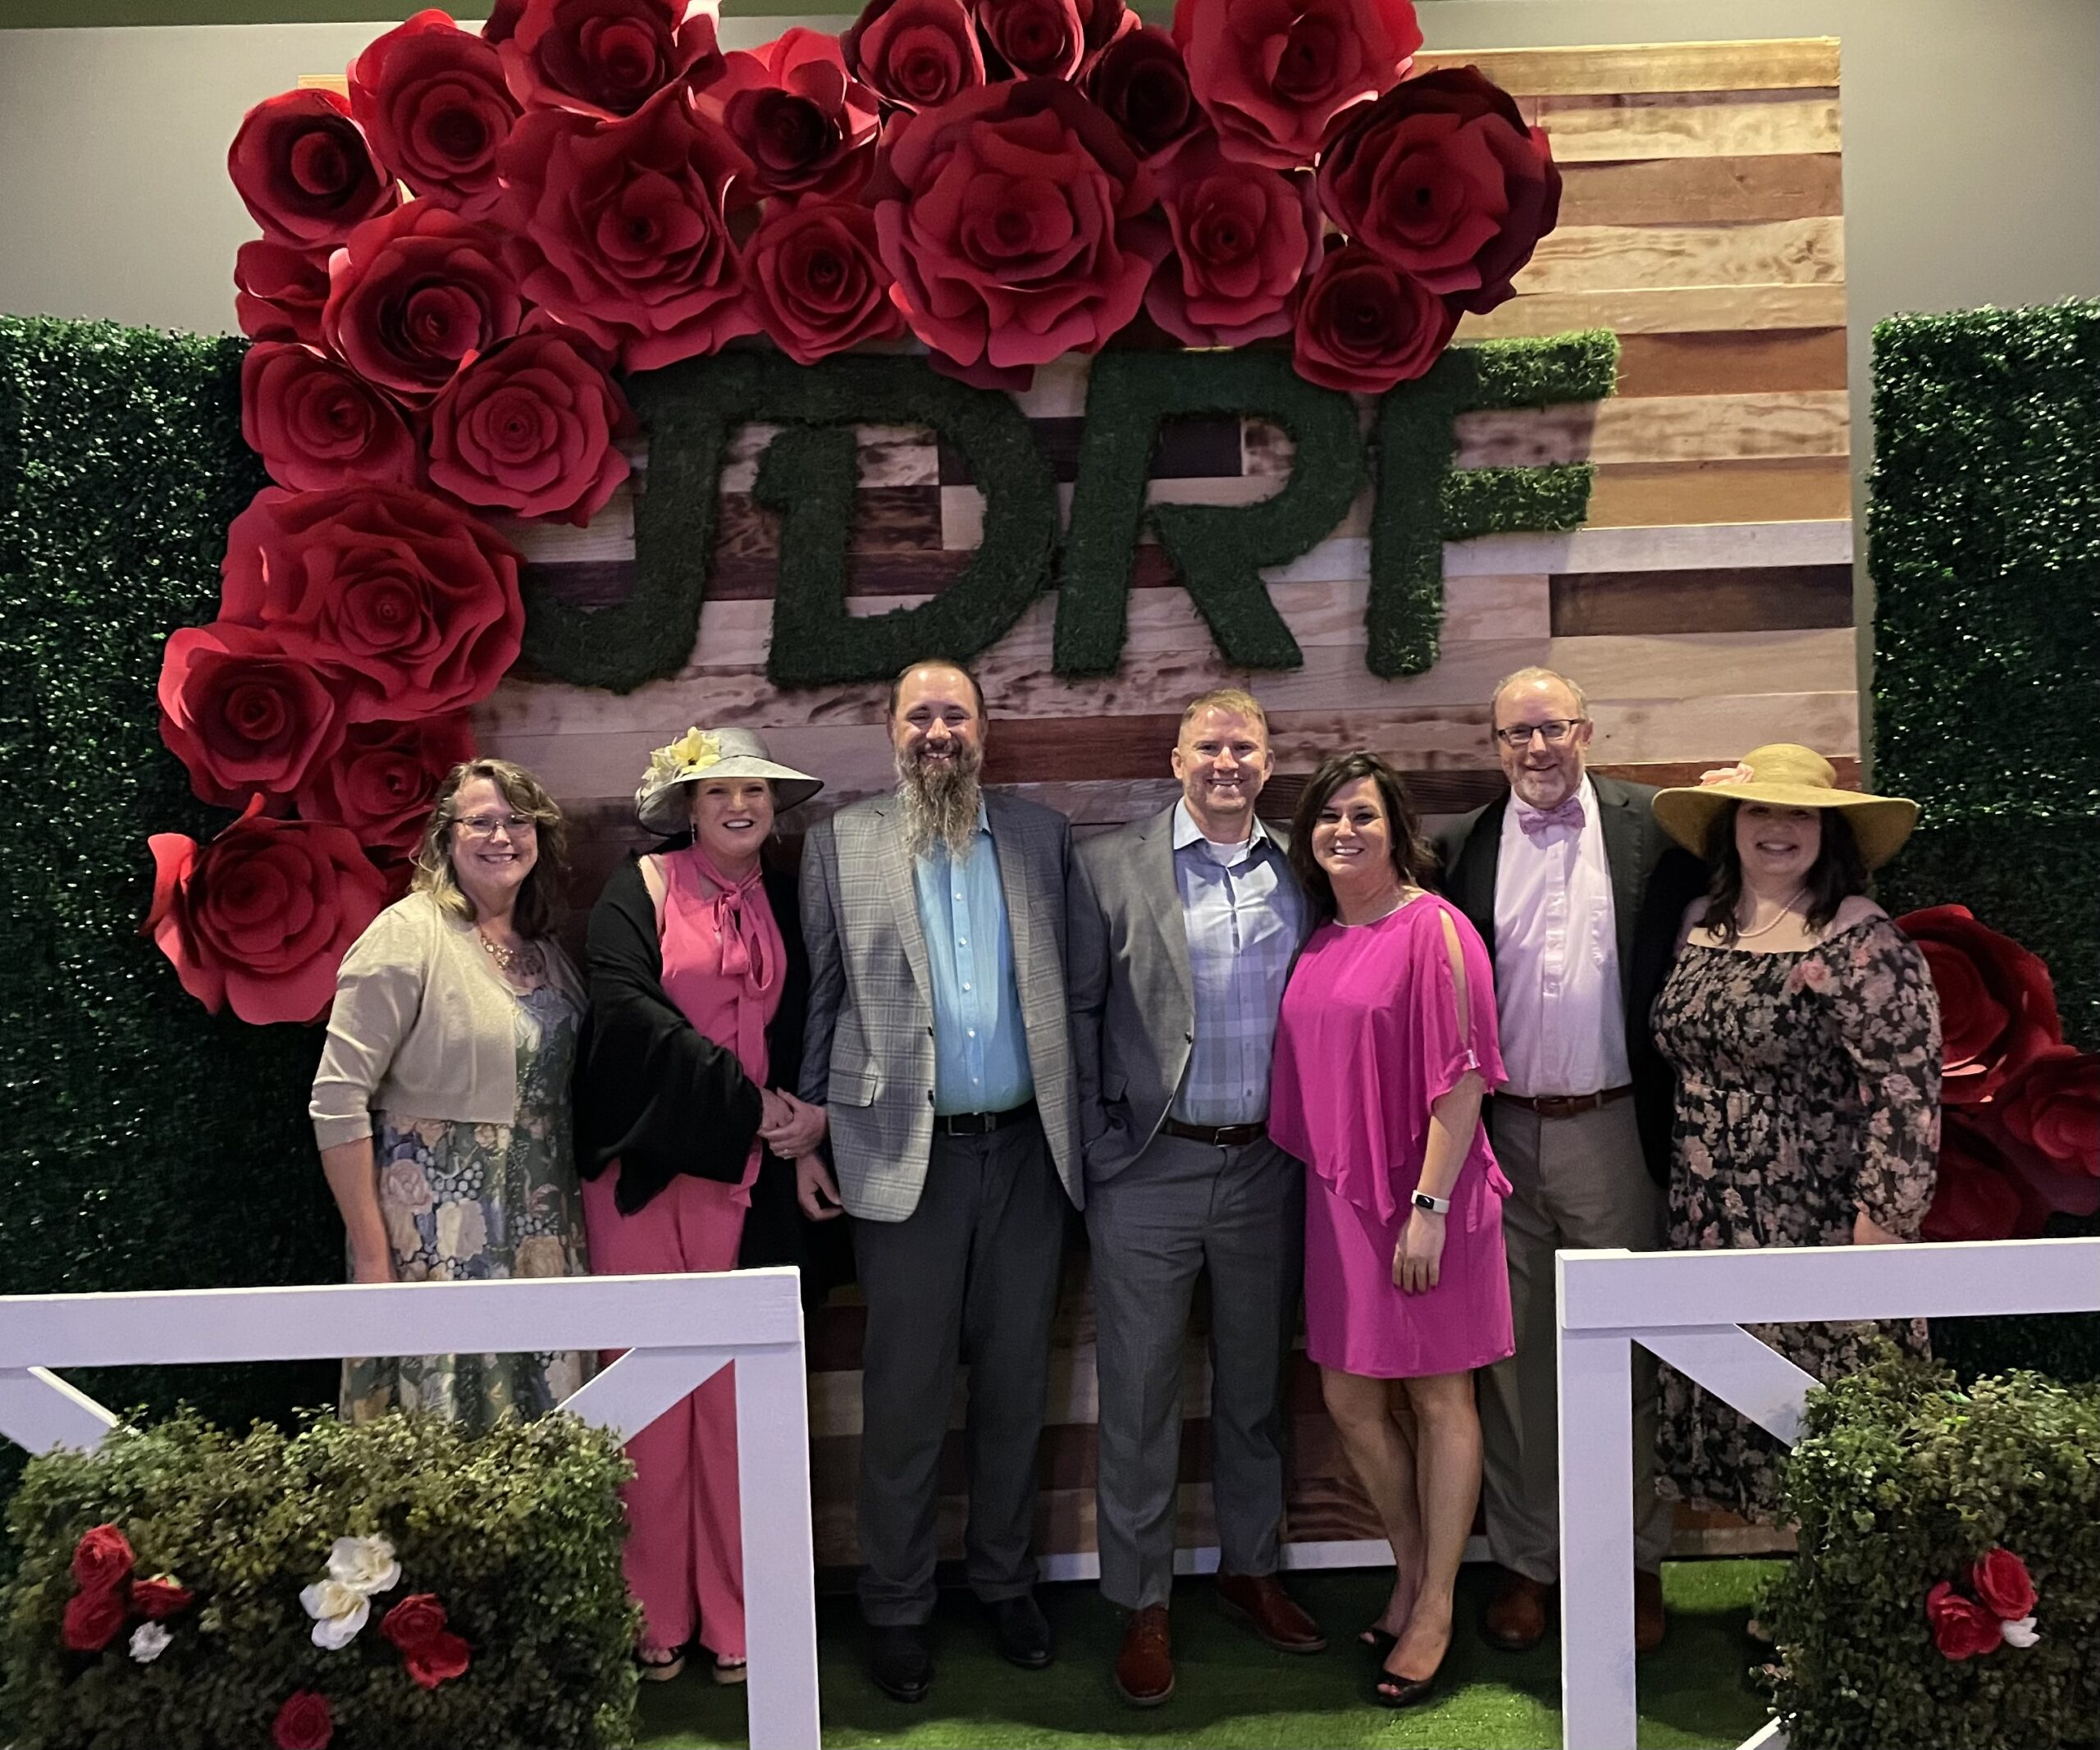 Messer Construction Company employees dressed up at JDRF Derby event